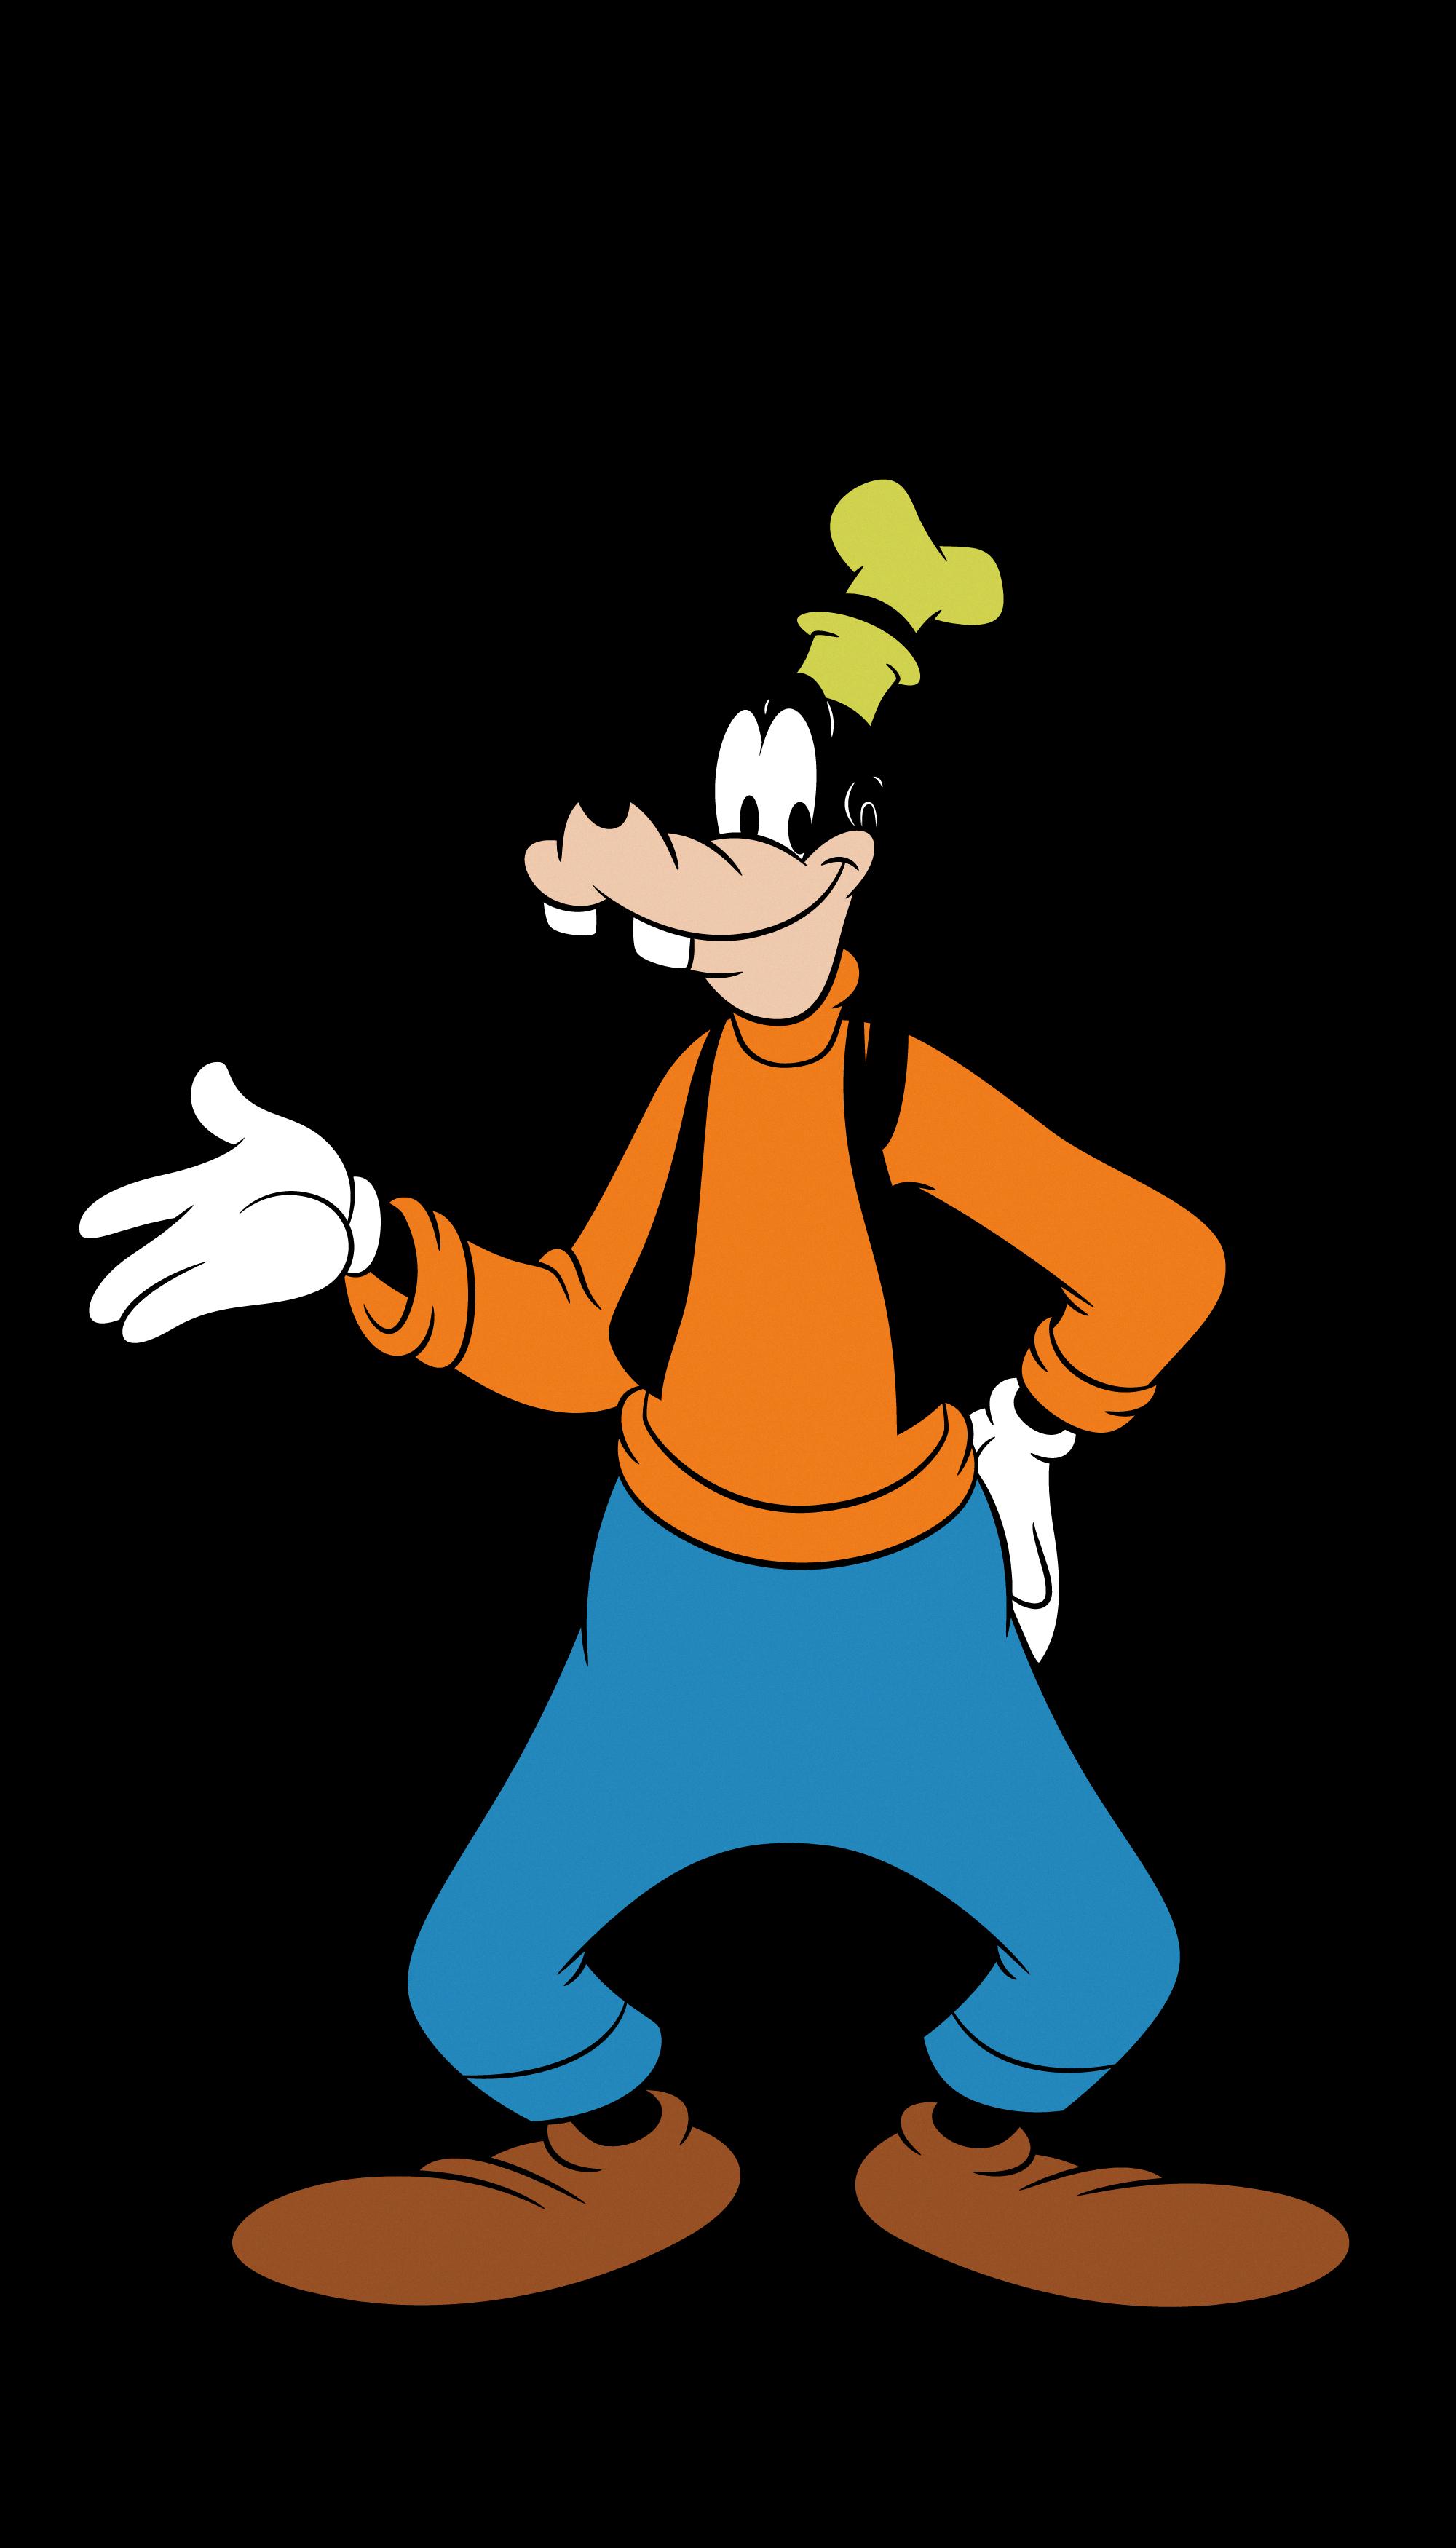 how old is goofy